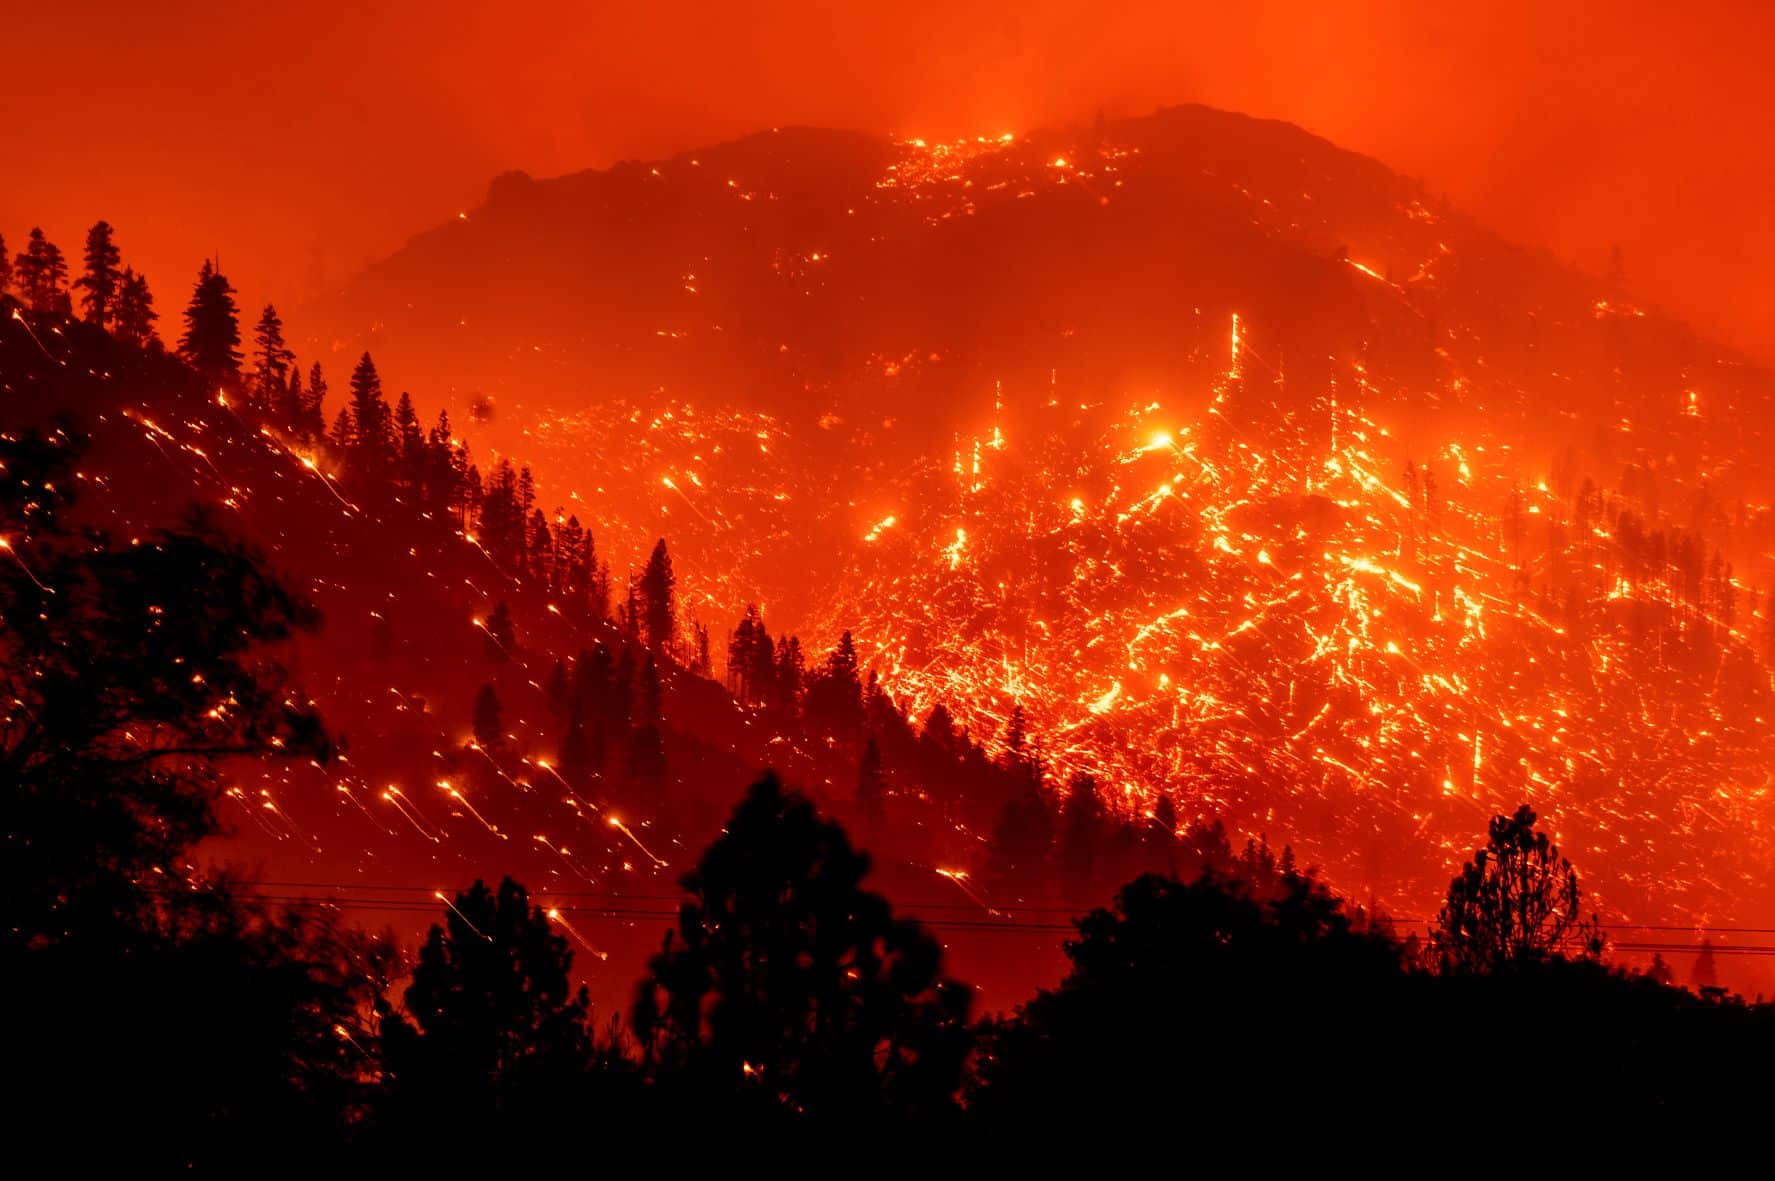 UCLA Study Ties Human-Caused Climate Change to Widespread Wildfires